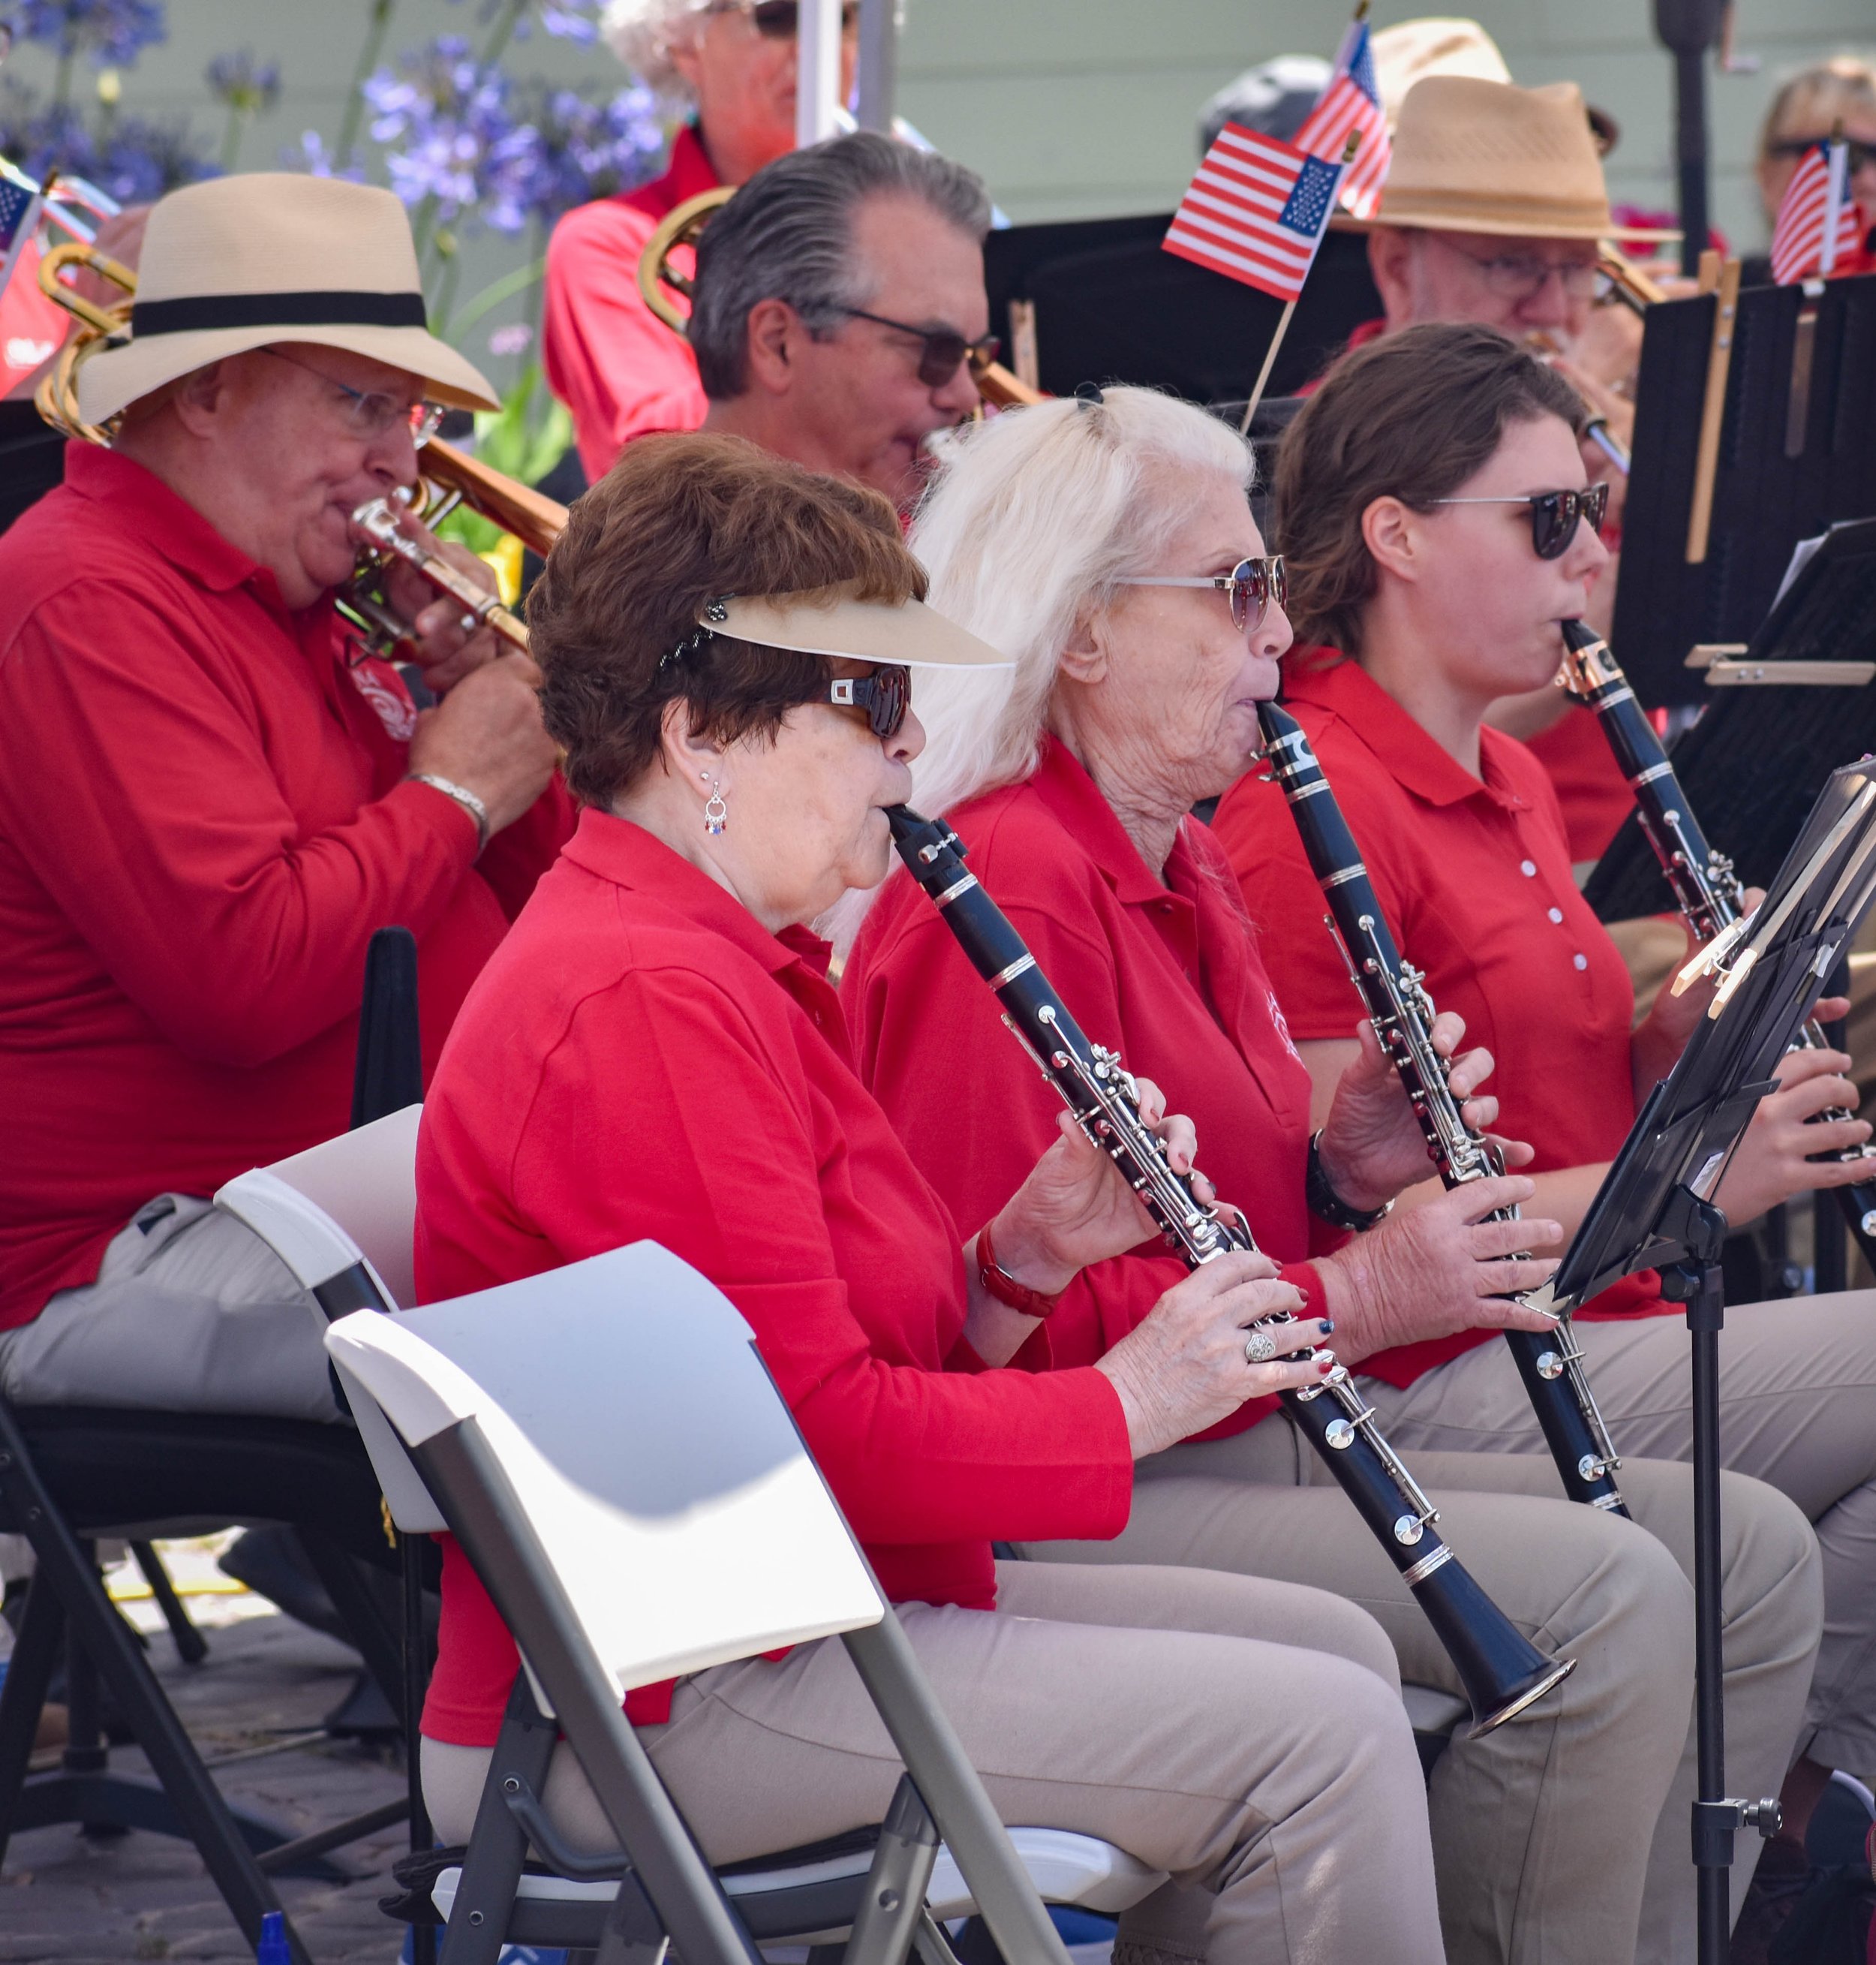 05-30-2022 LCCB Memorial Day Concert by Peyton Webster57-44.jpg